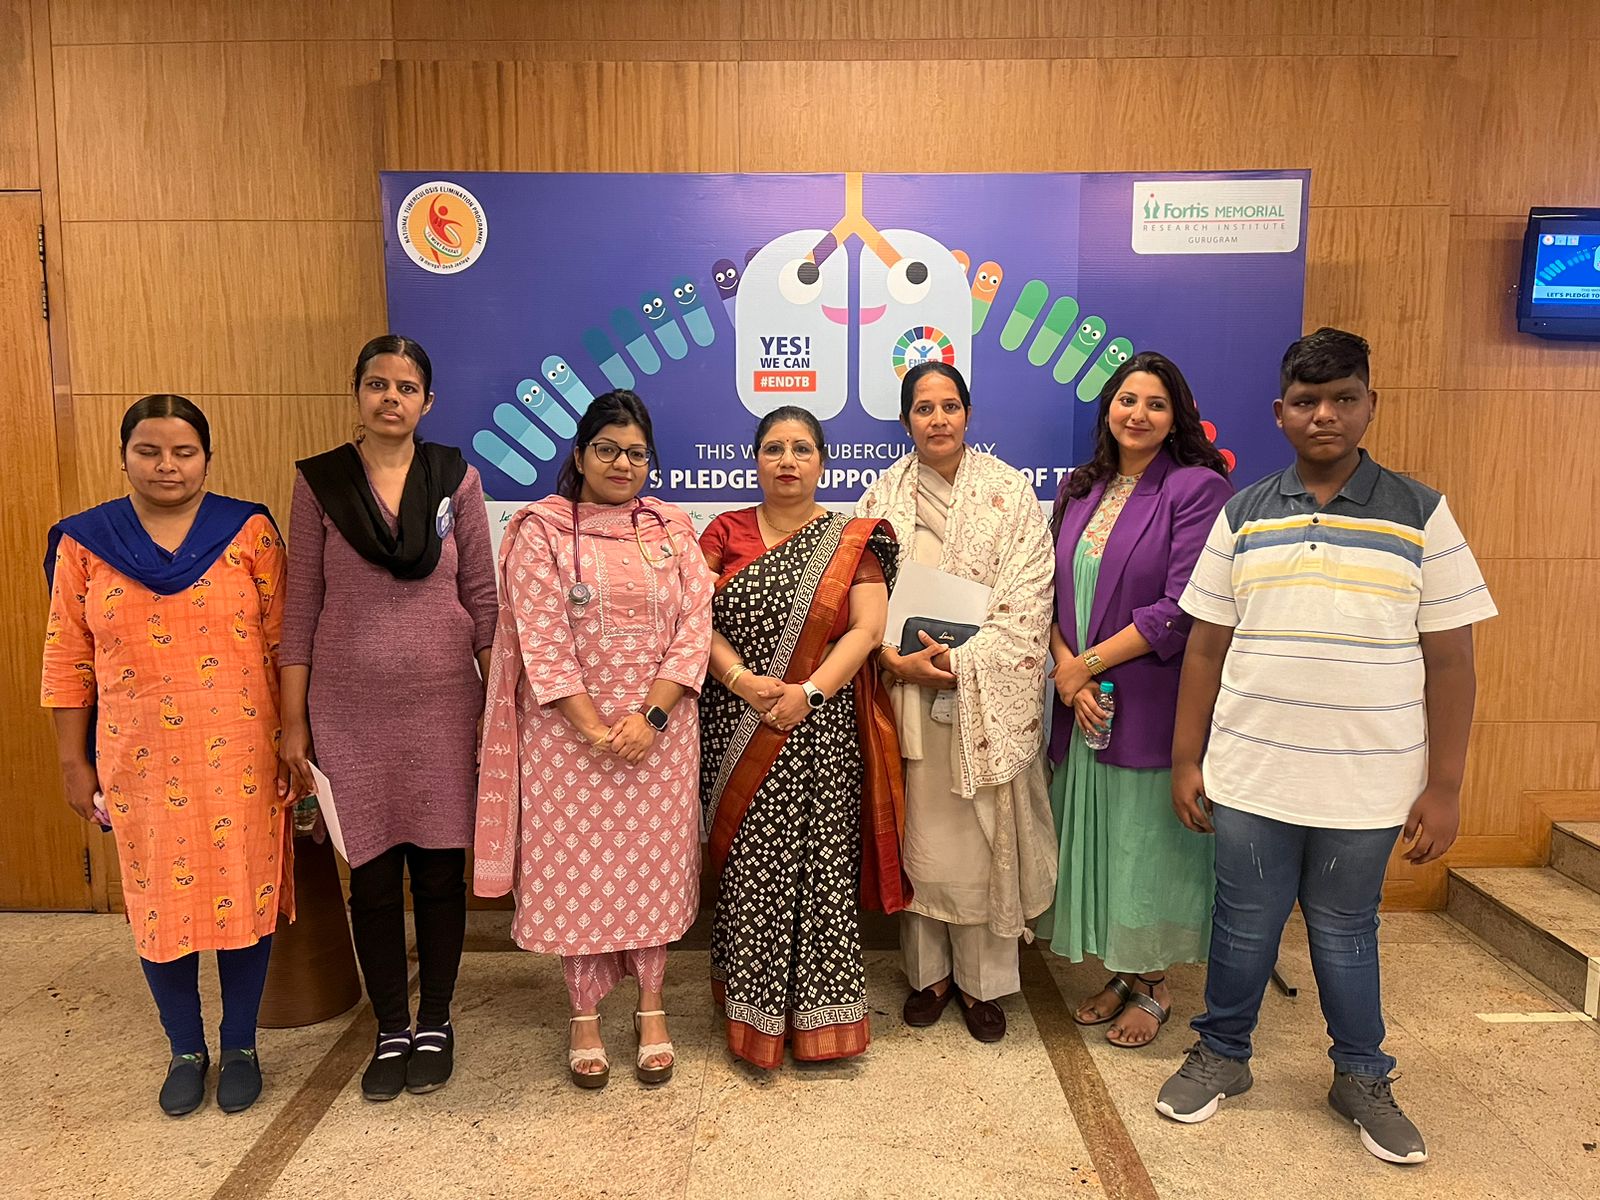 important-to-tackle-tuberculosis-and-its-challenges-fortis-gurugram-organizes-event-to-raise-awareness-about-the-growing-threat-of-tuberculosis